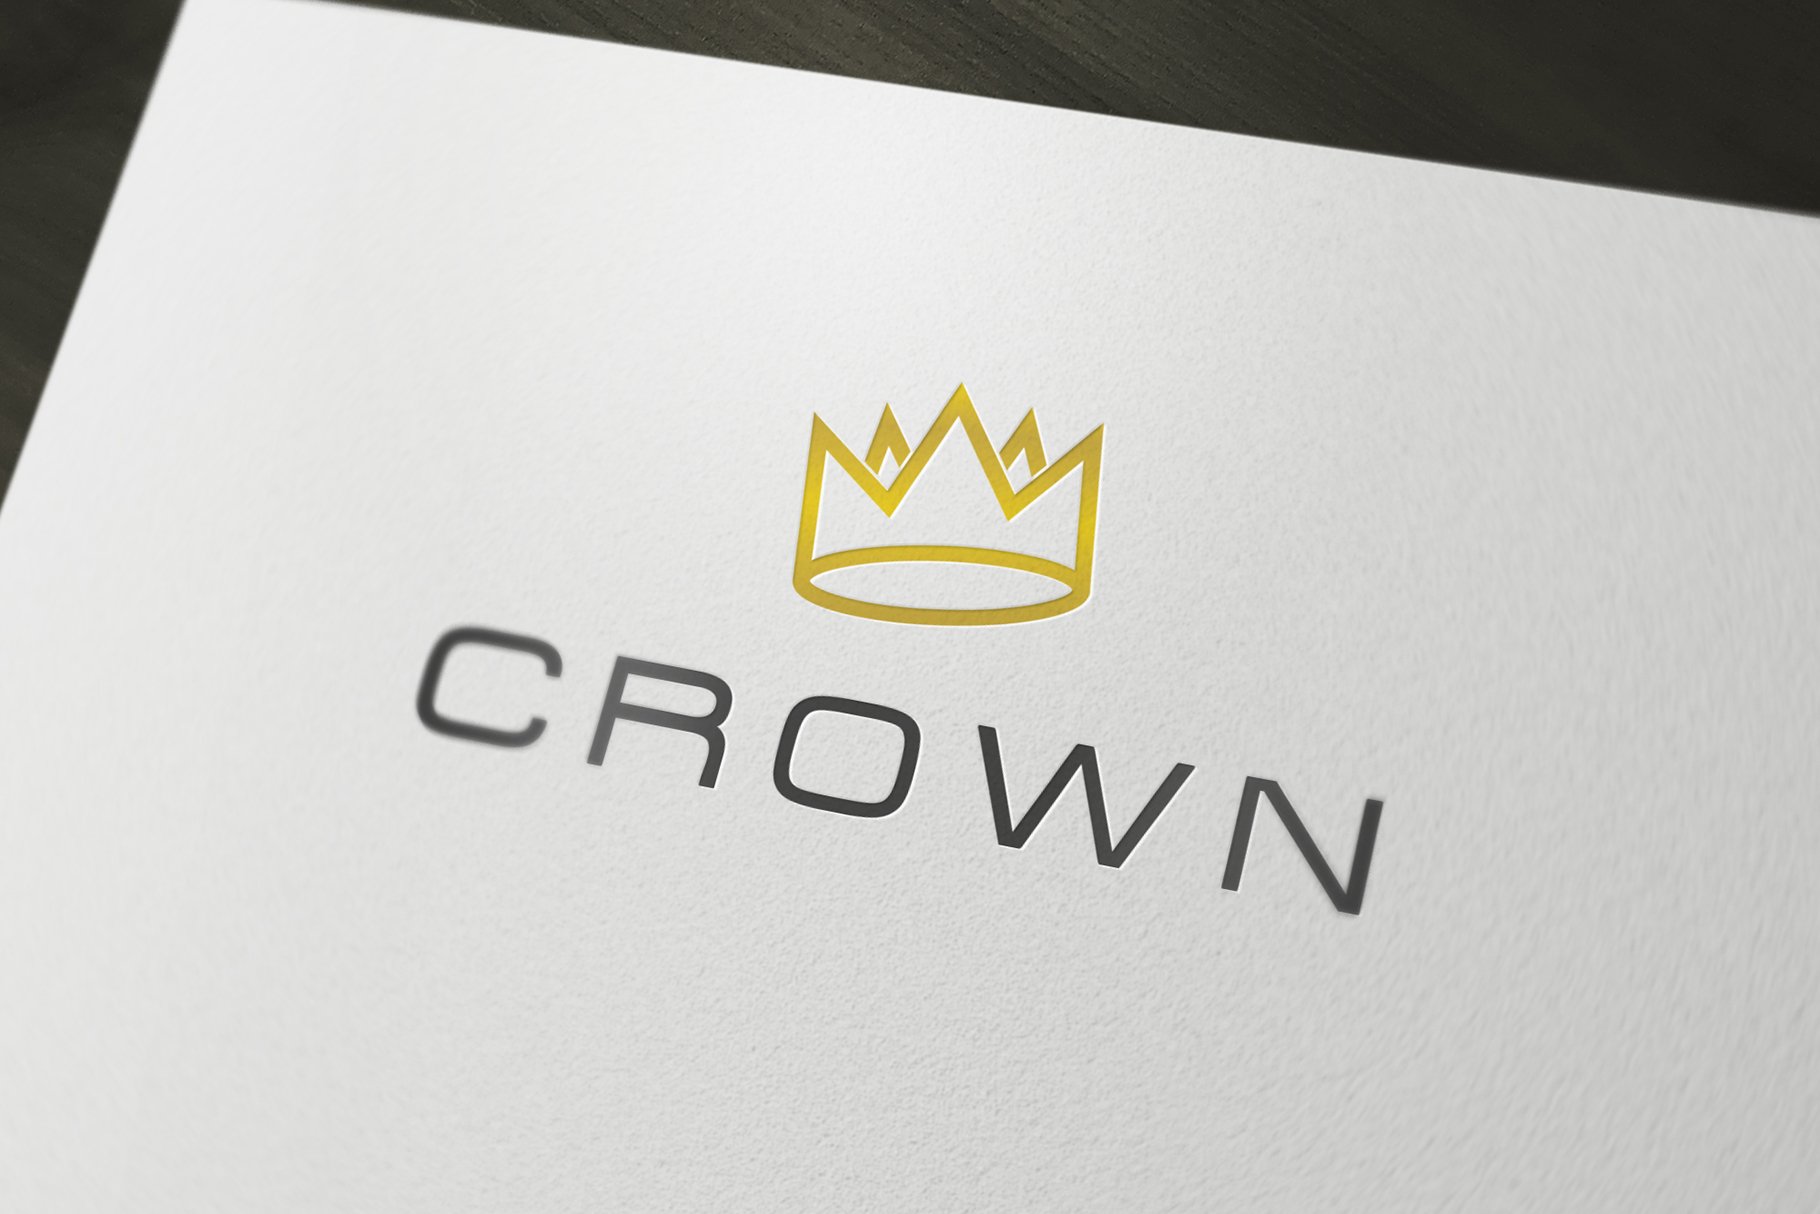 A few options of crowns for logo.